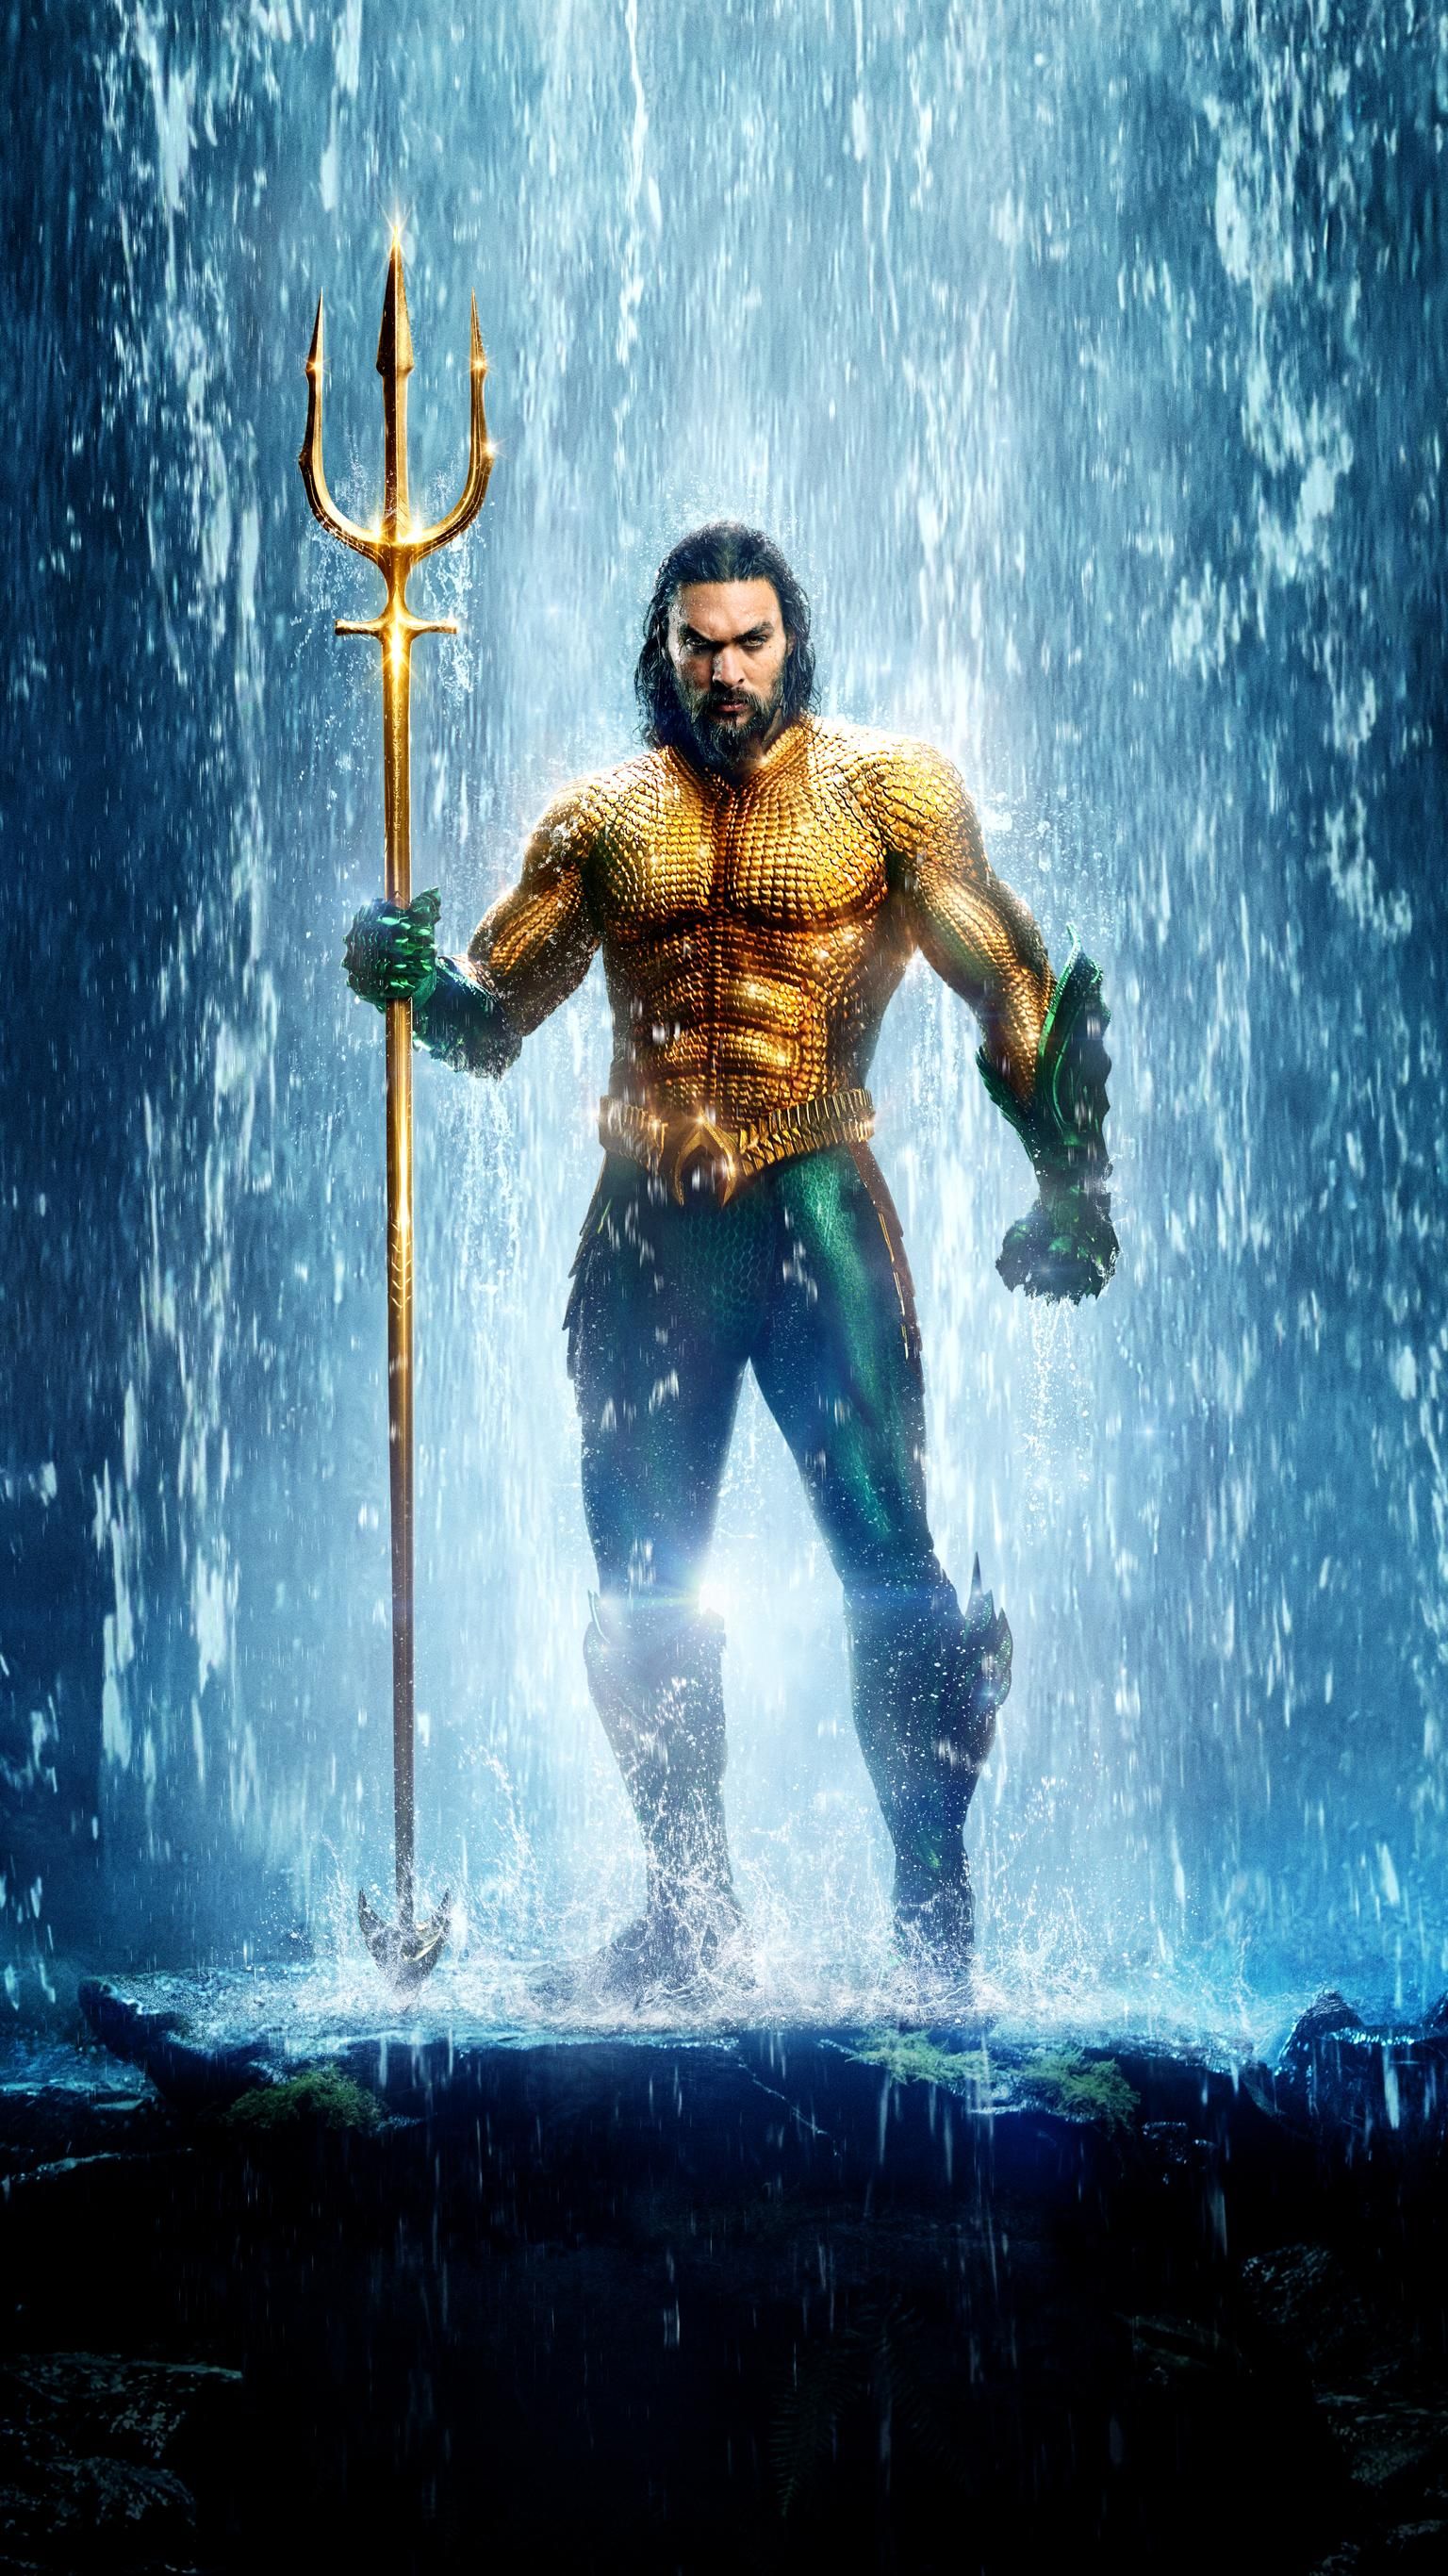 Aquaman for android download